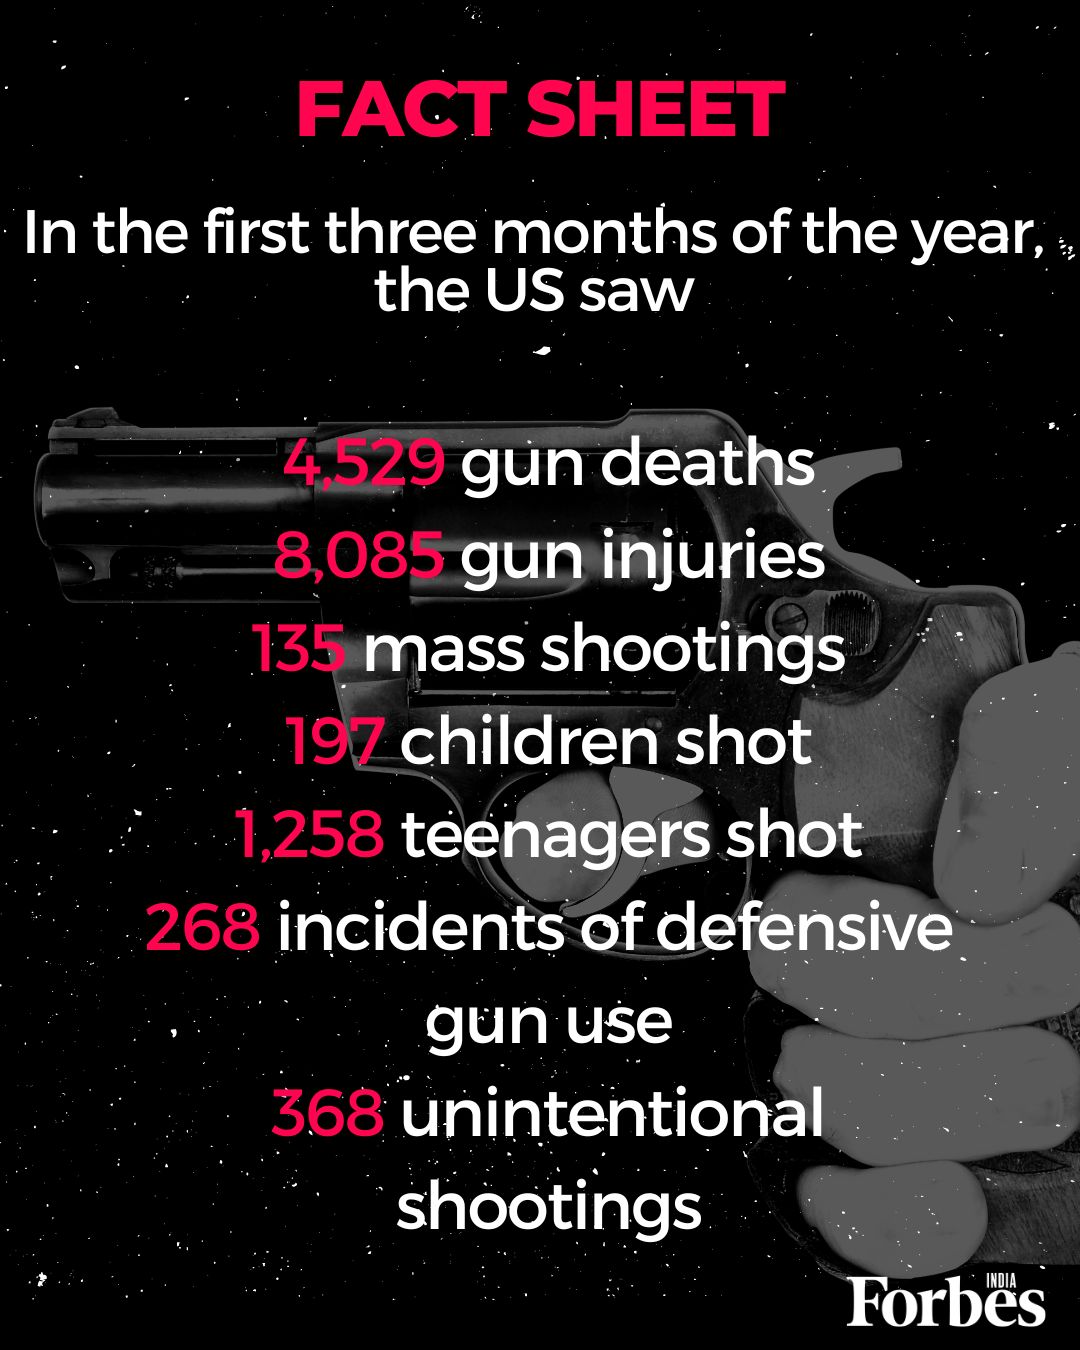 Mass shootings in the US: In numbers